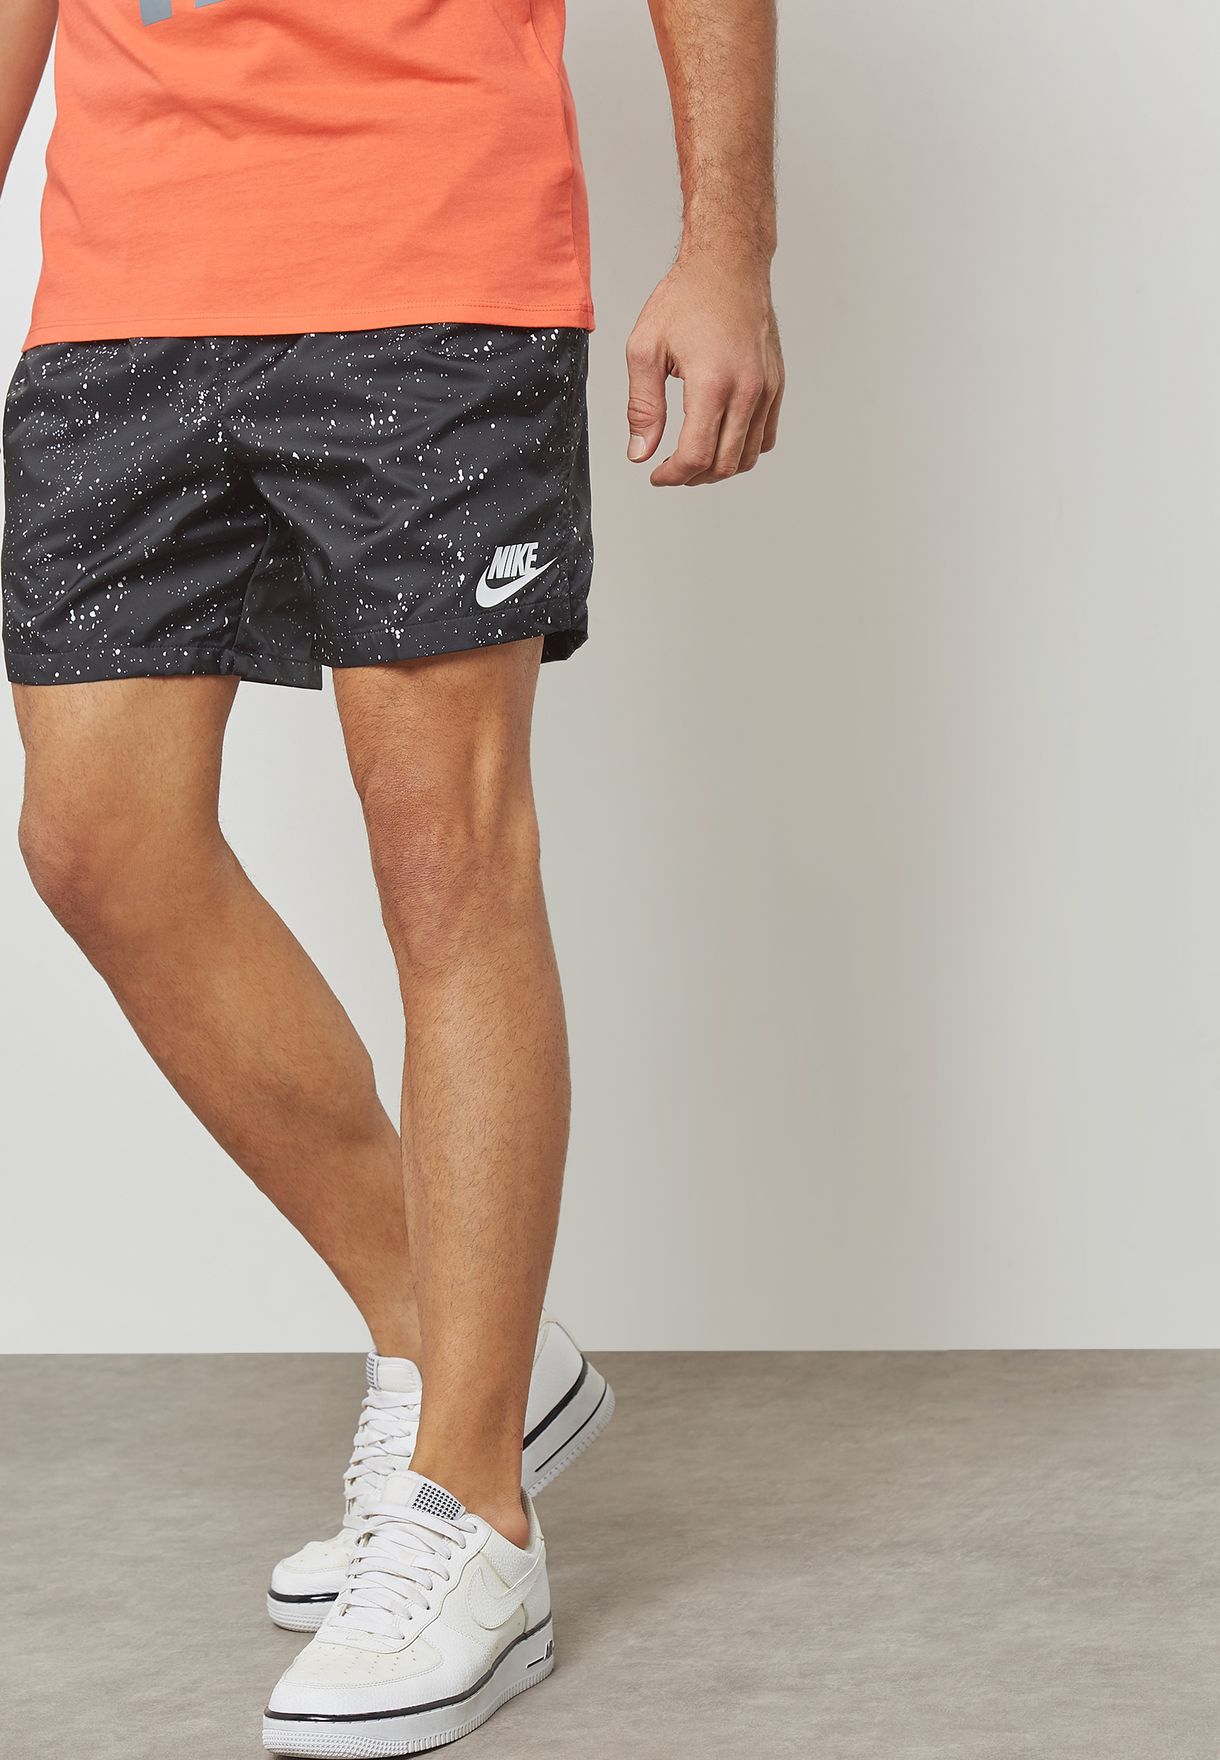 Buy Nike prints Flow Woven Shorts for 